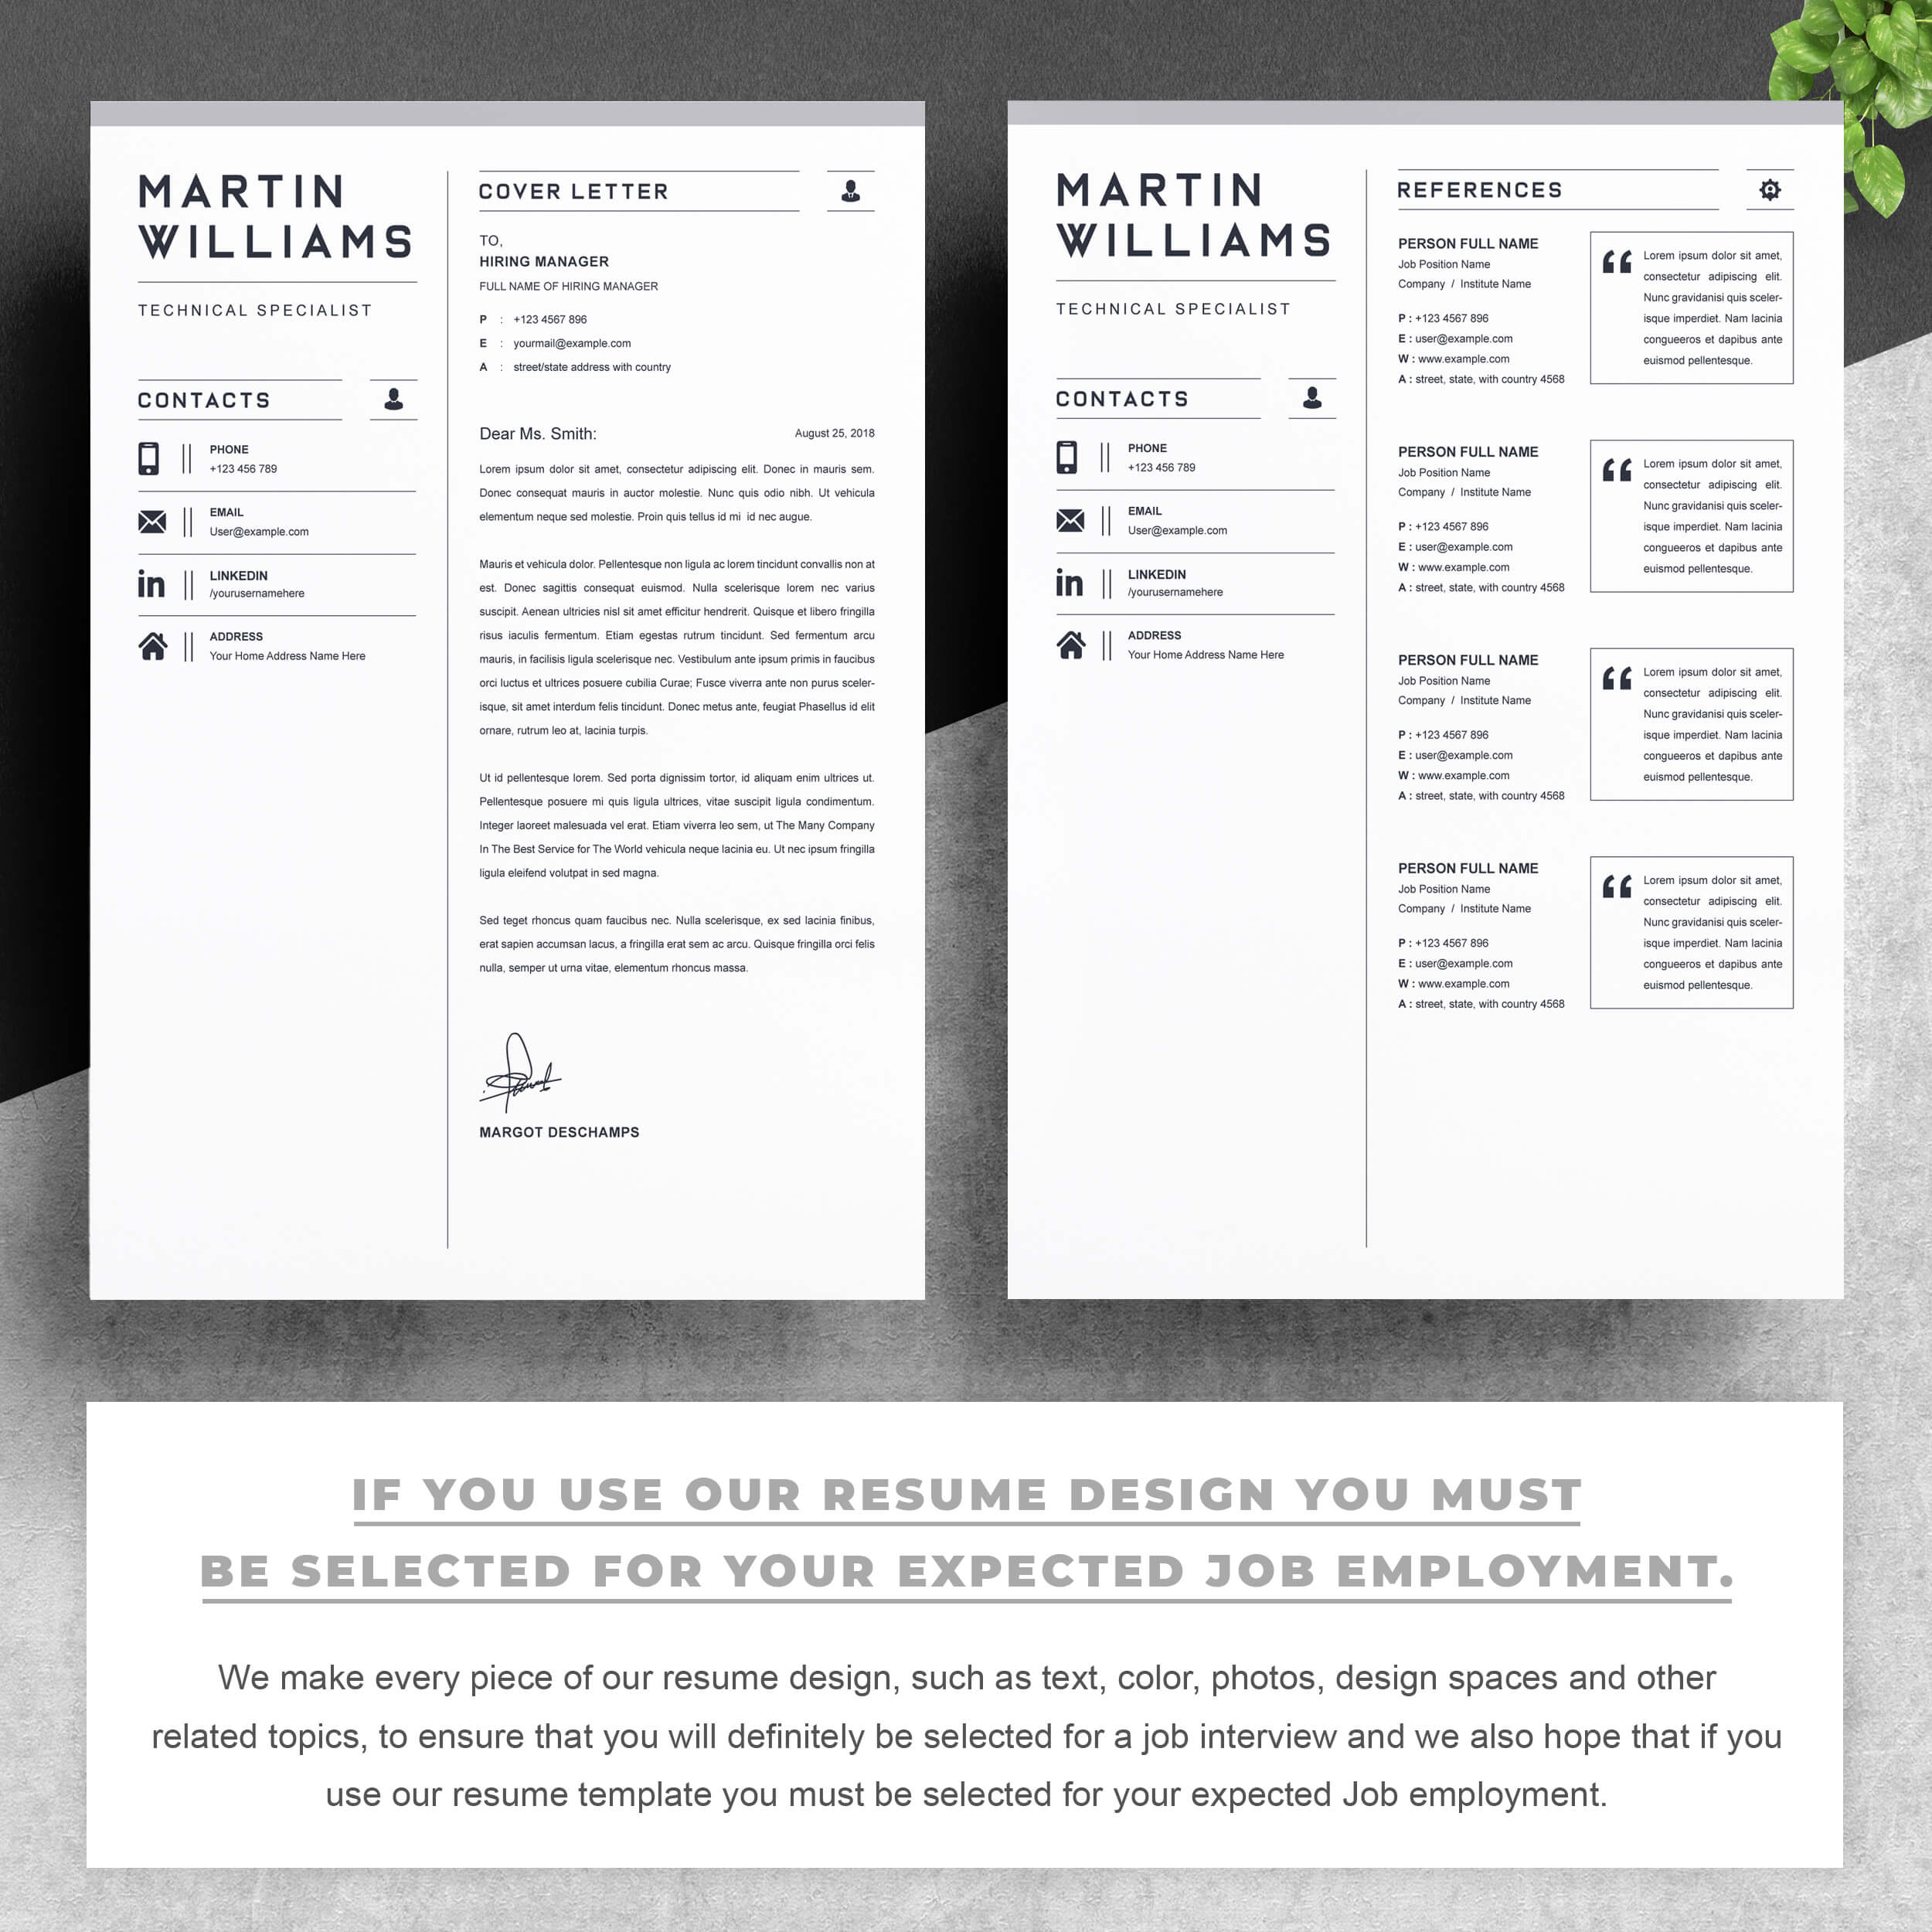 03 2 pages free resume design template copy 2 101